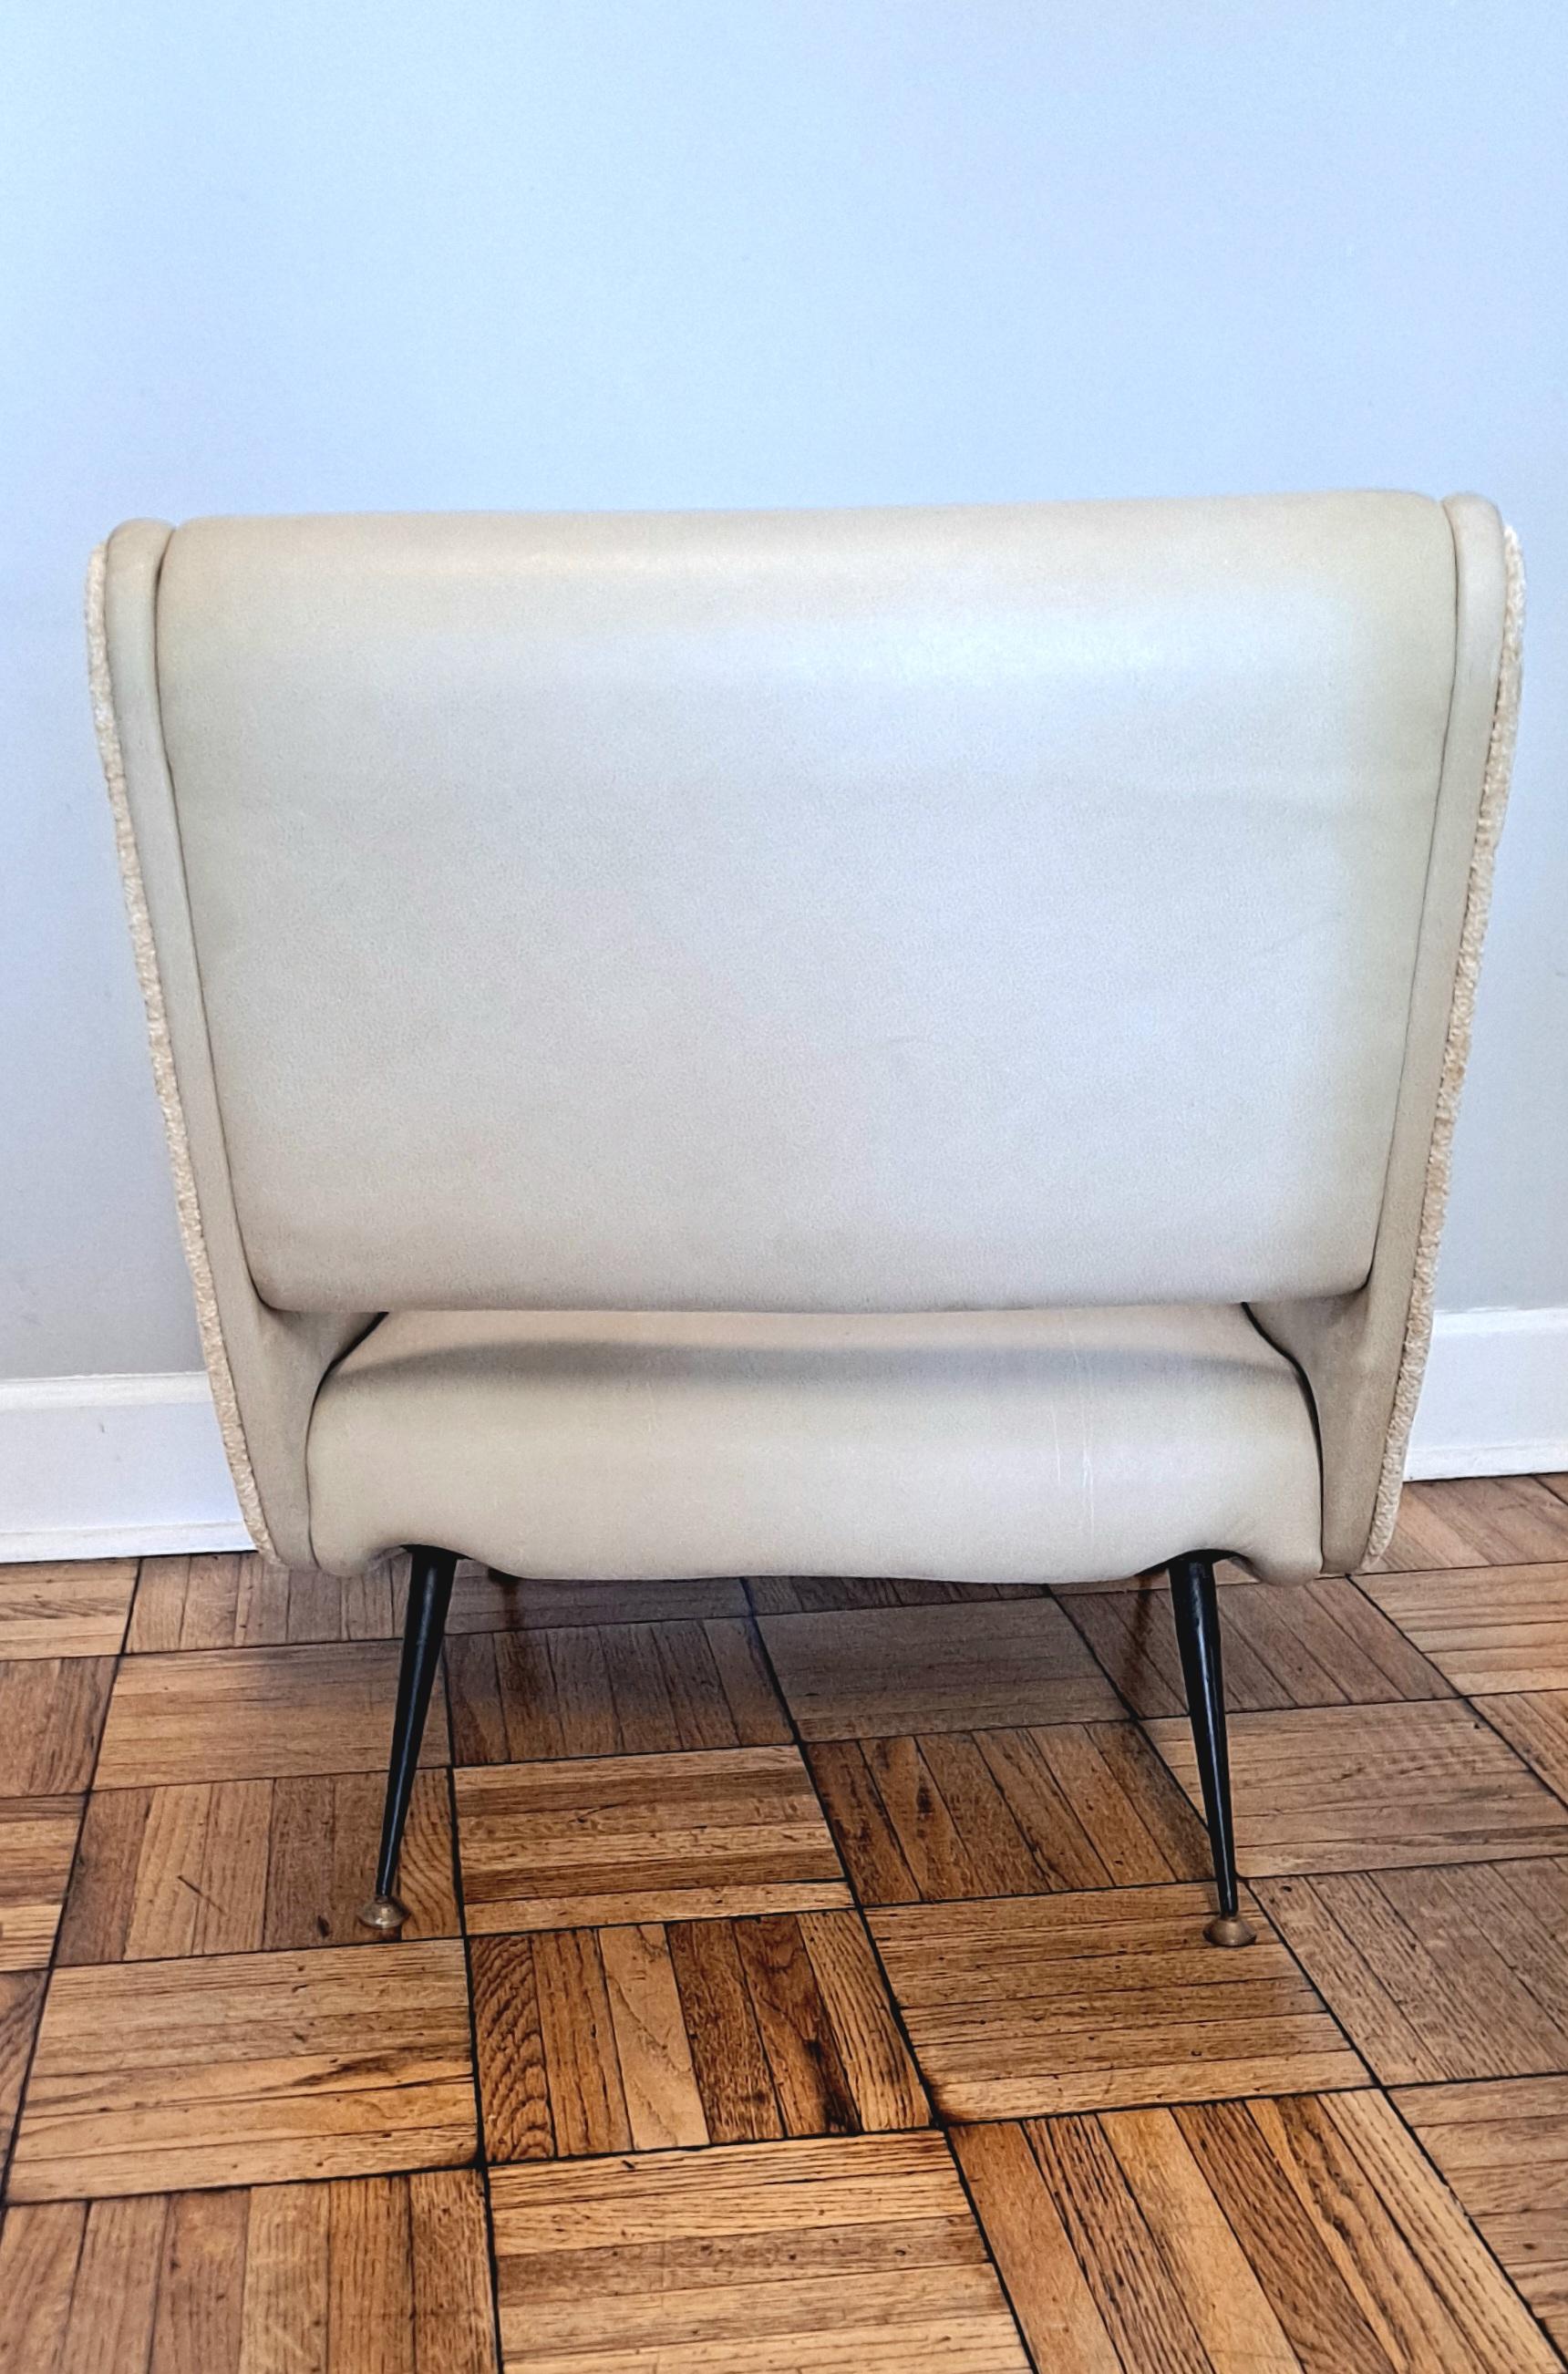 Gigi Radice Italian Chair  In Good Condition For Sale In Los Angeles, CA